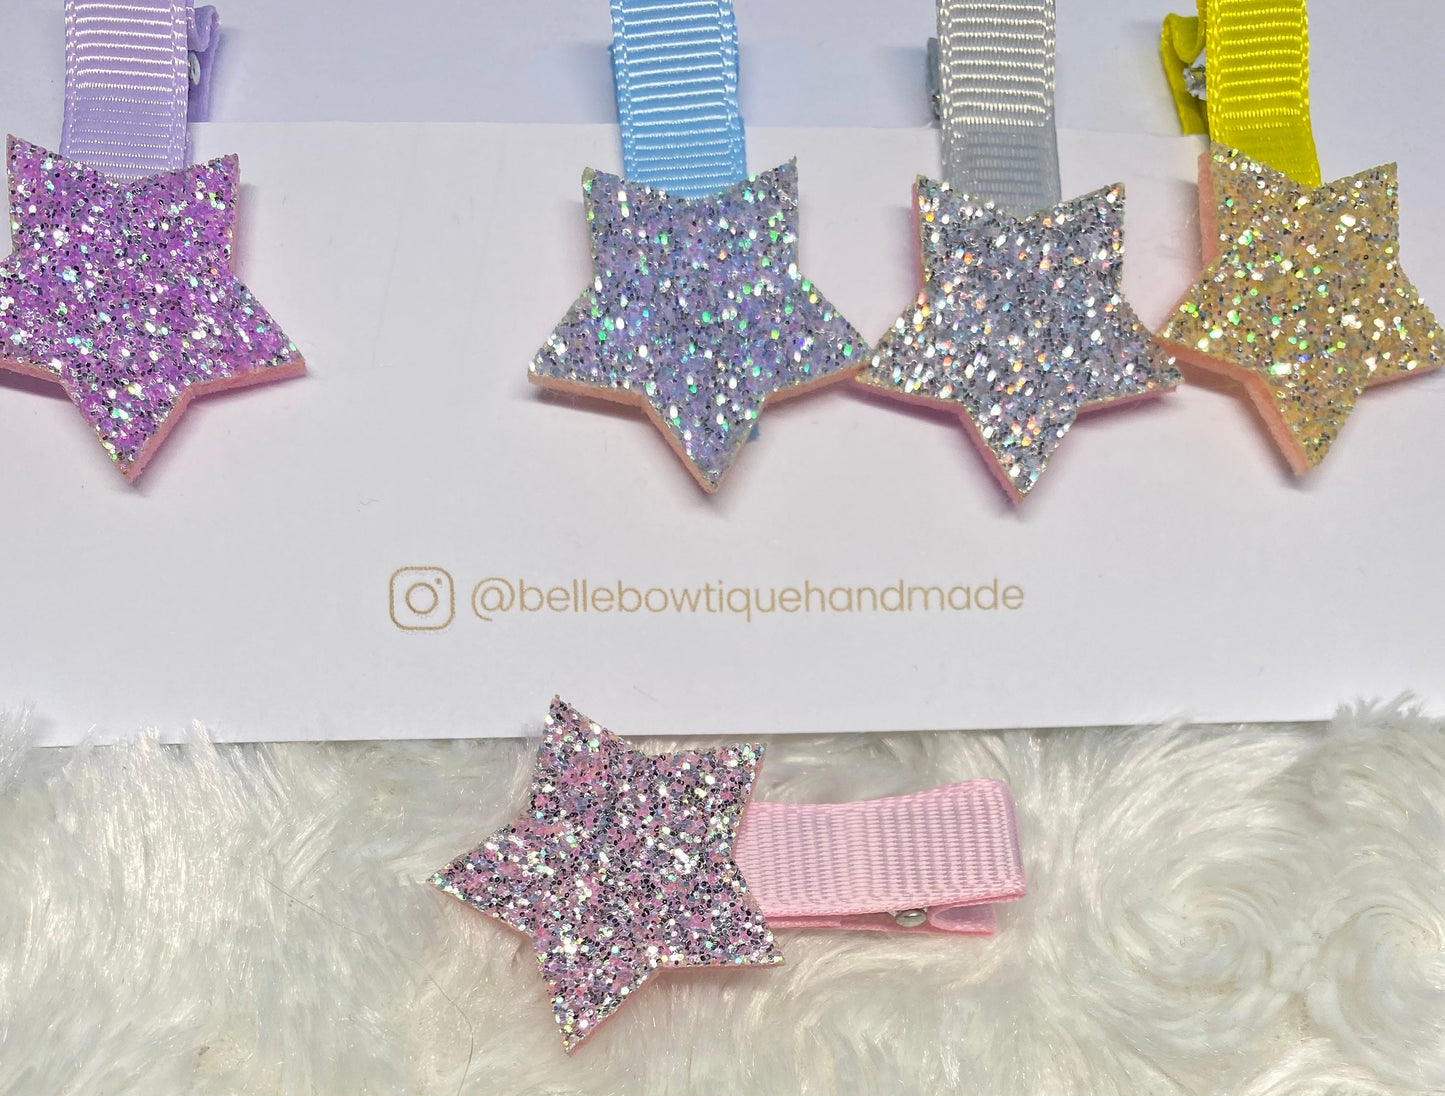 Rainbow Star Ribbon Fringe Clips Pack of 5- Small Clips - Mini Clips - Clip Pack - Baby Hair Clips - Toddler Hair Clips - Lined hair clip